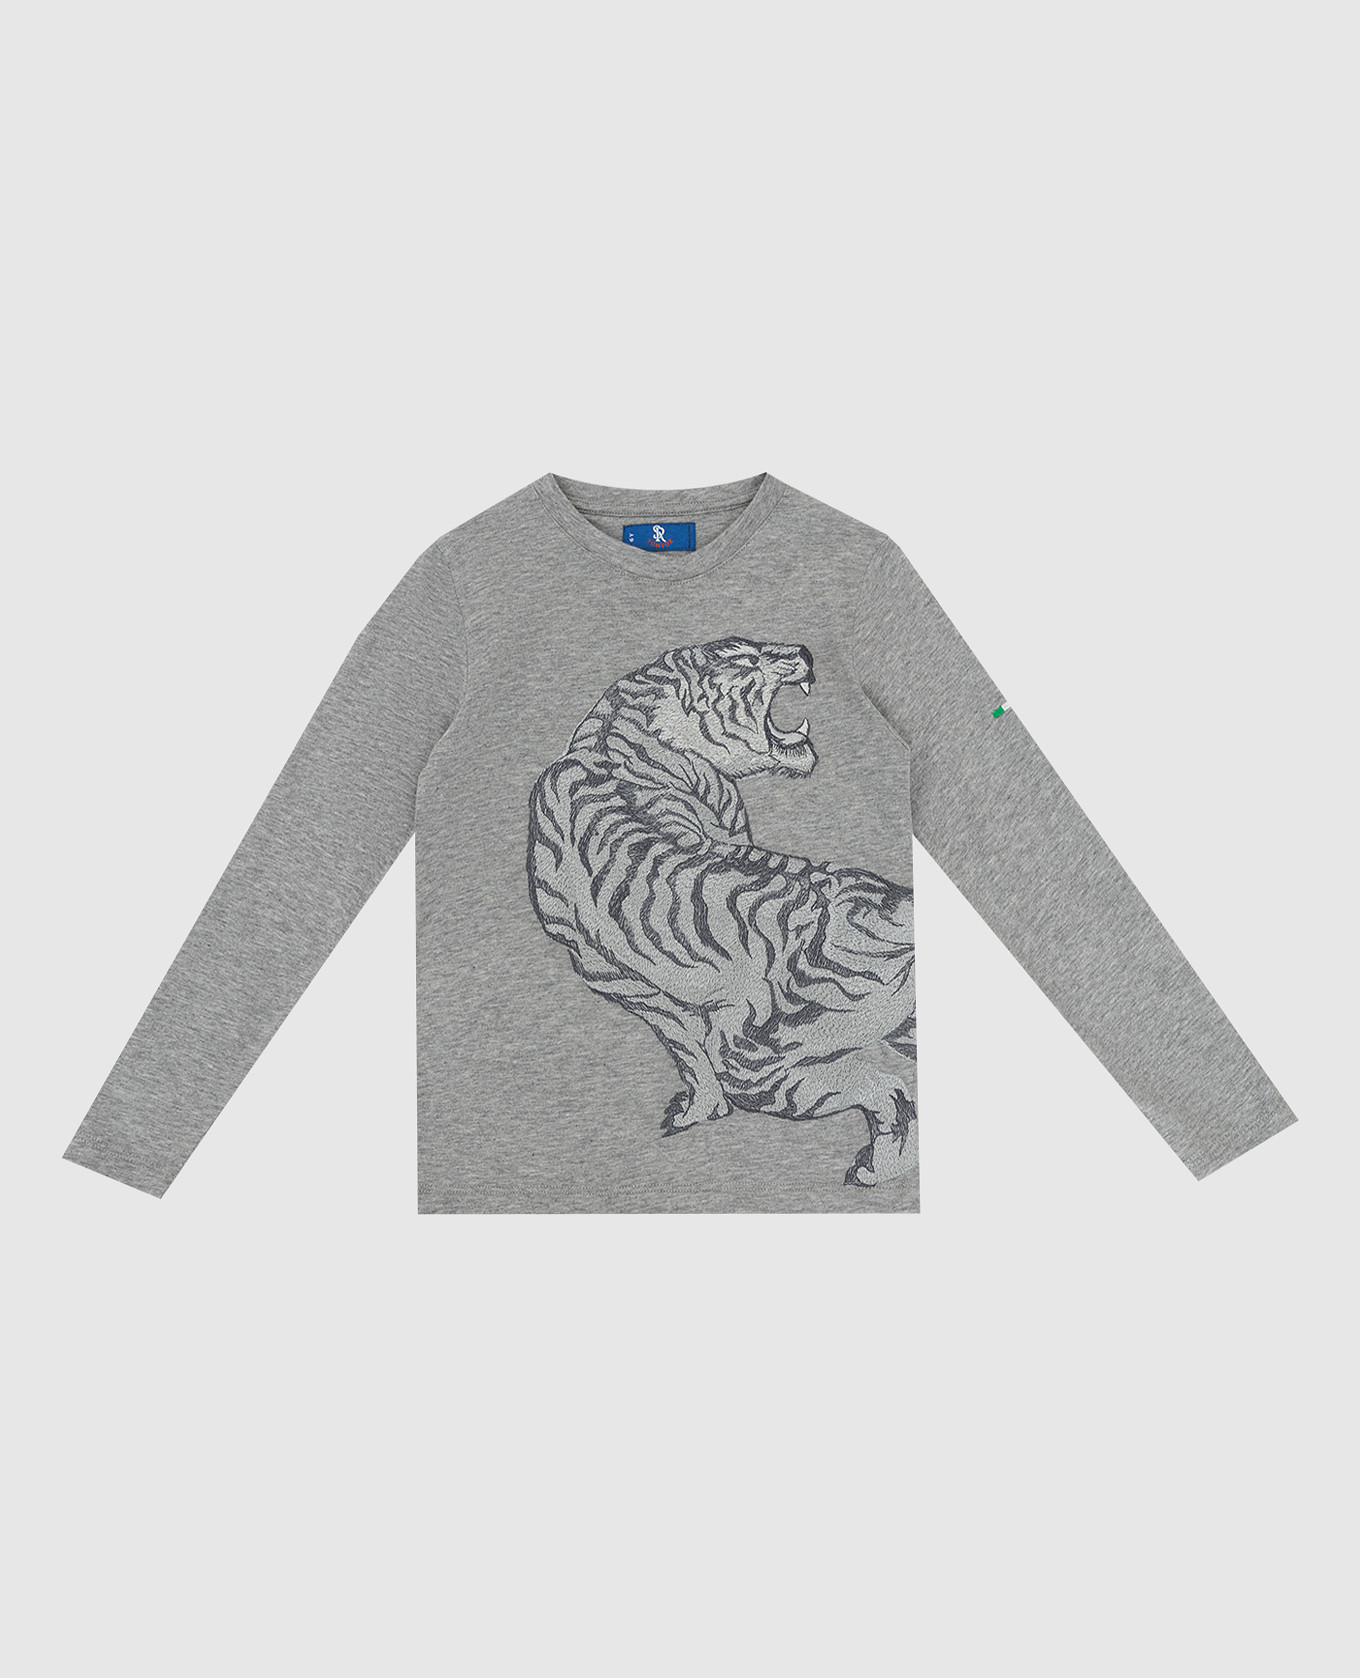 Children's light gray longsleeve with embroidery